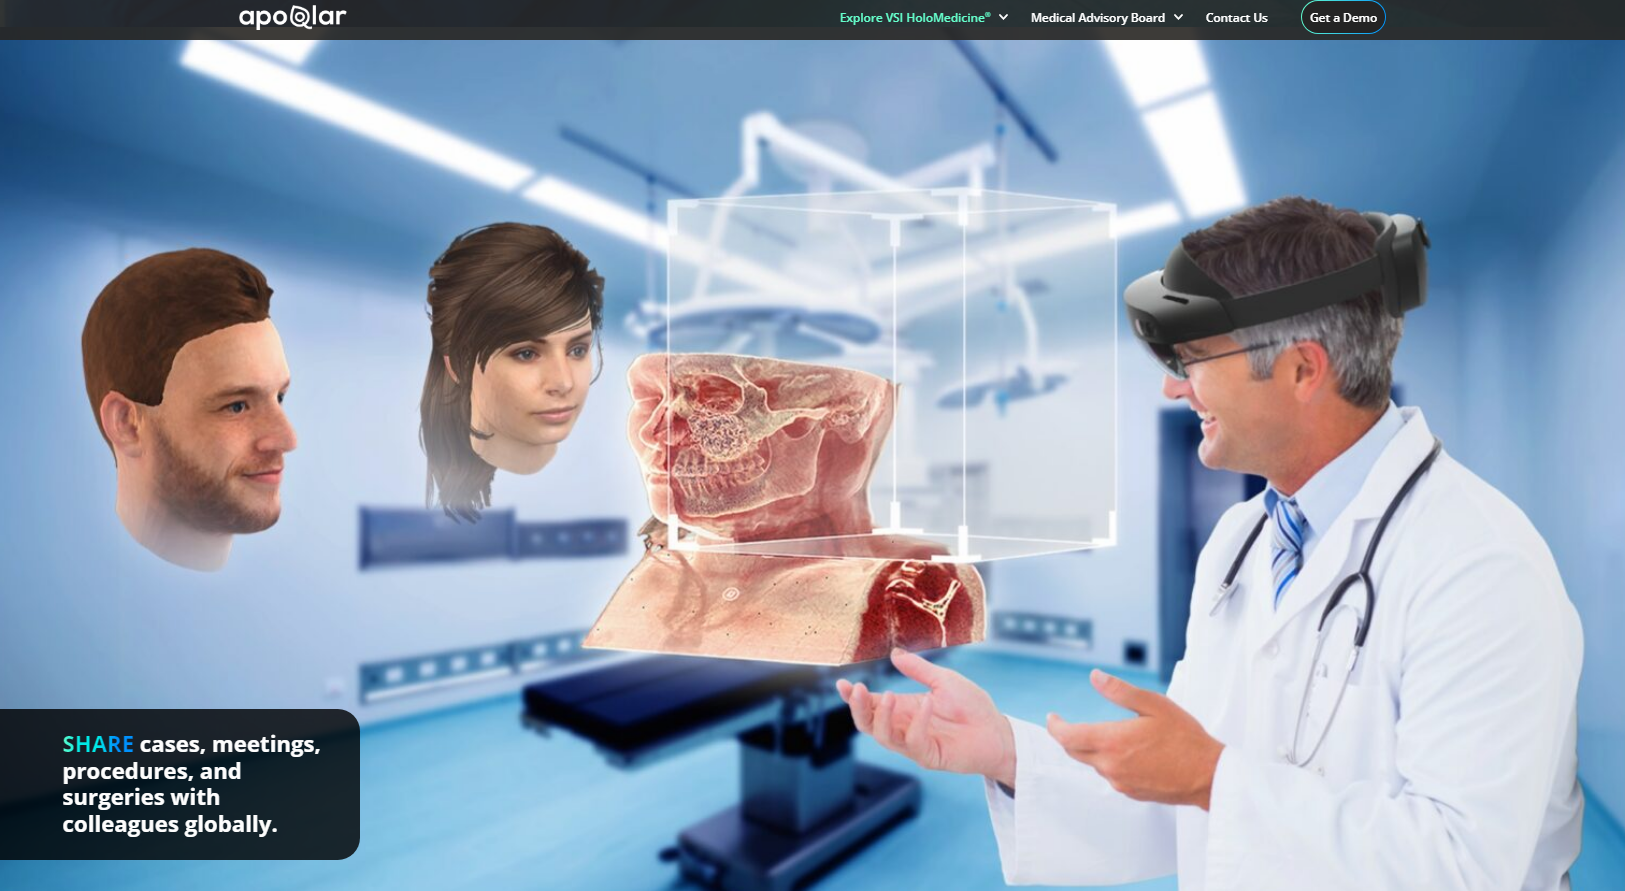 mixed reality applications for healthcare and medicine